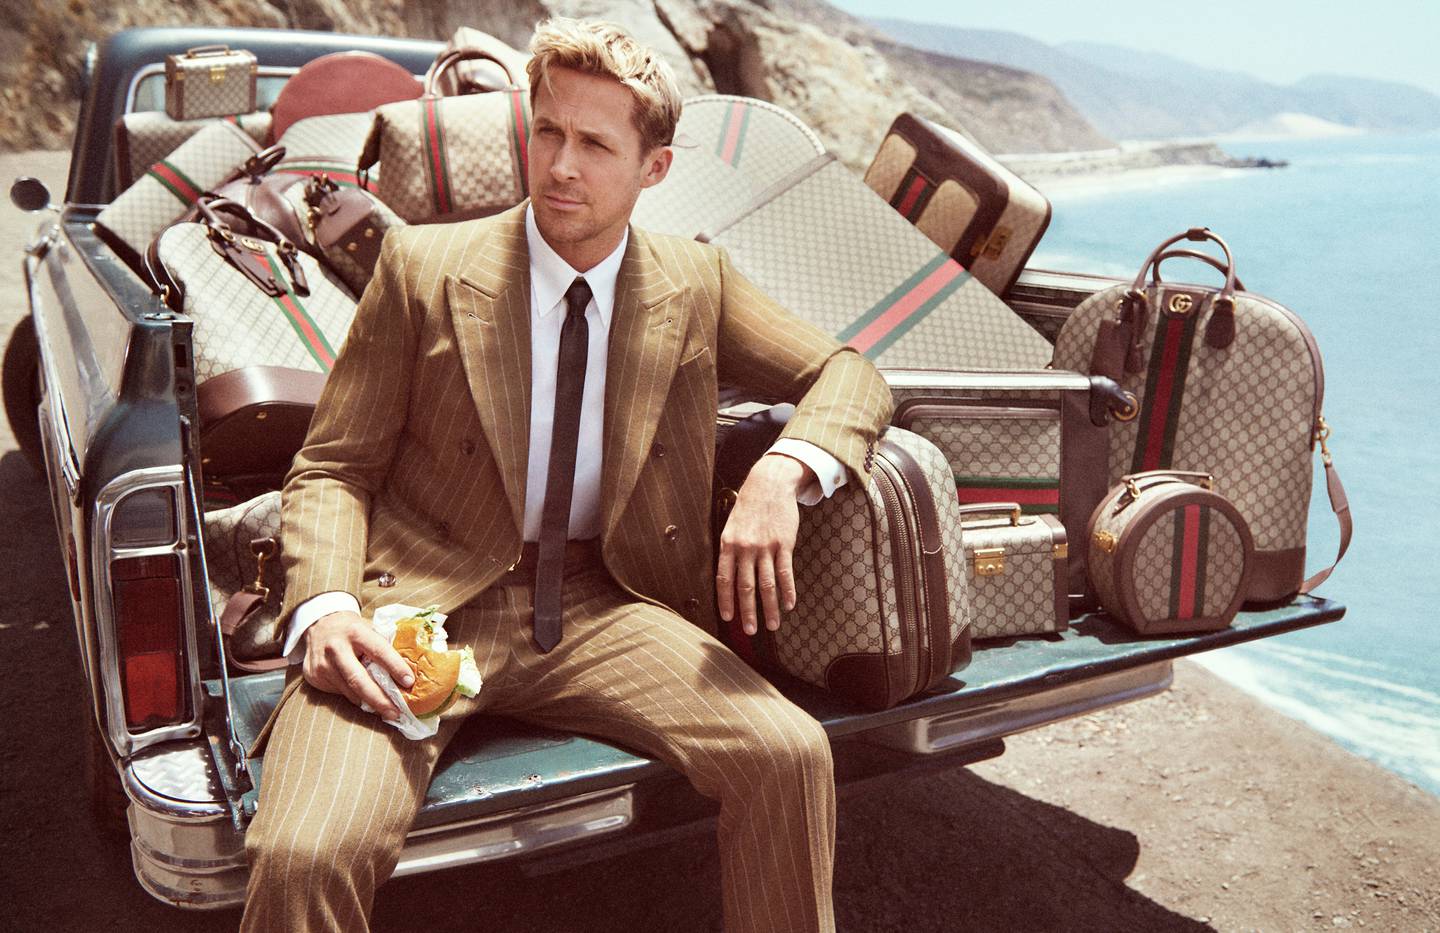 Gucci plays up its most timeless products in its Valigeria campaign featuring Ryan Gosling.